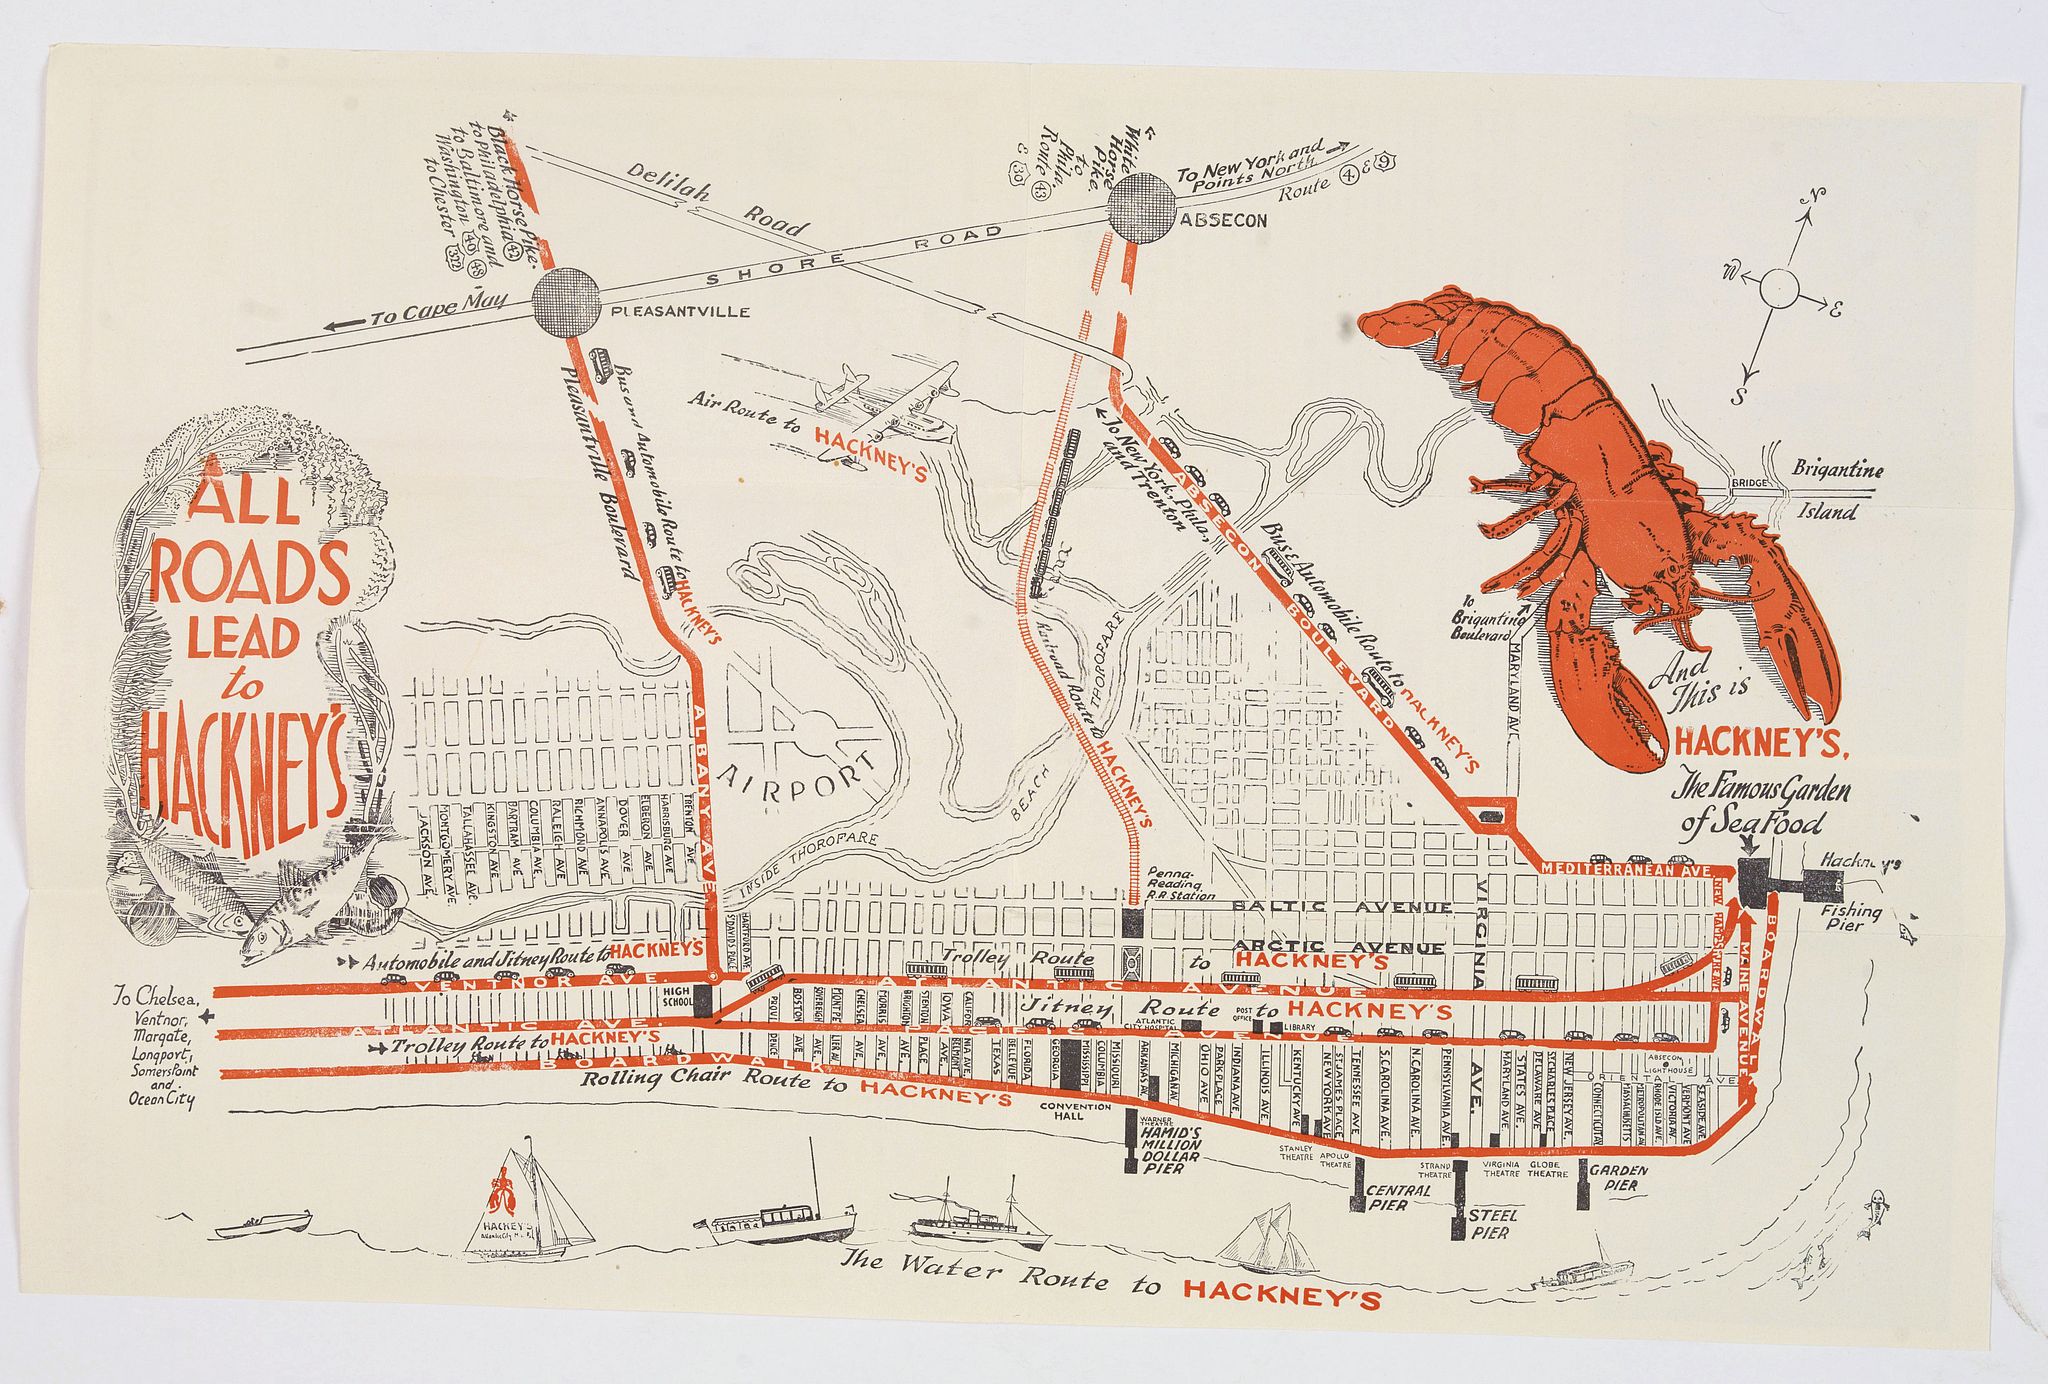 [Publicity map of Atlantic City with all roads leading to Hackney's Famous Garden of Sea Food]